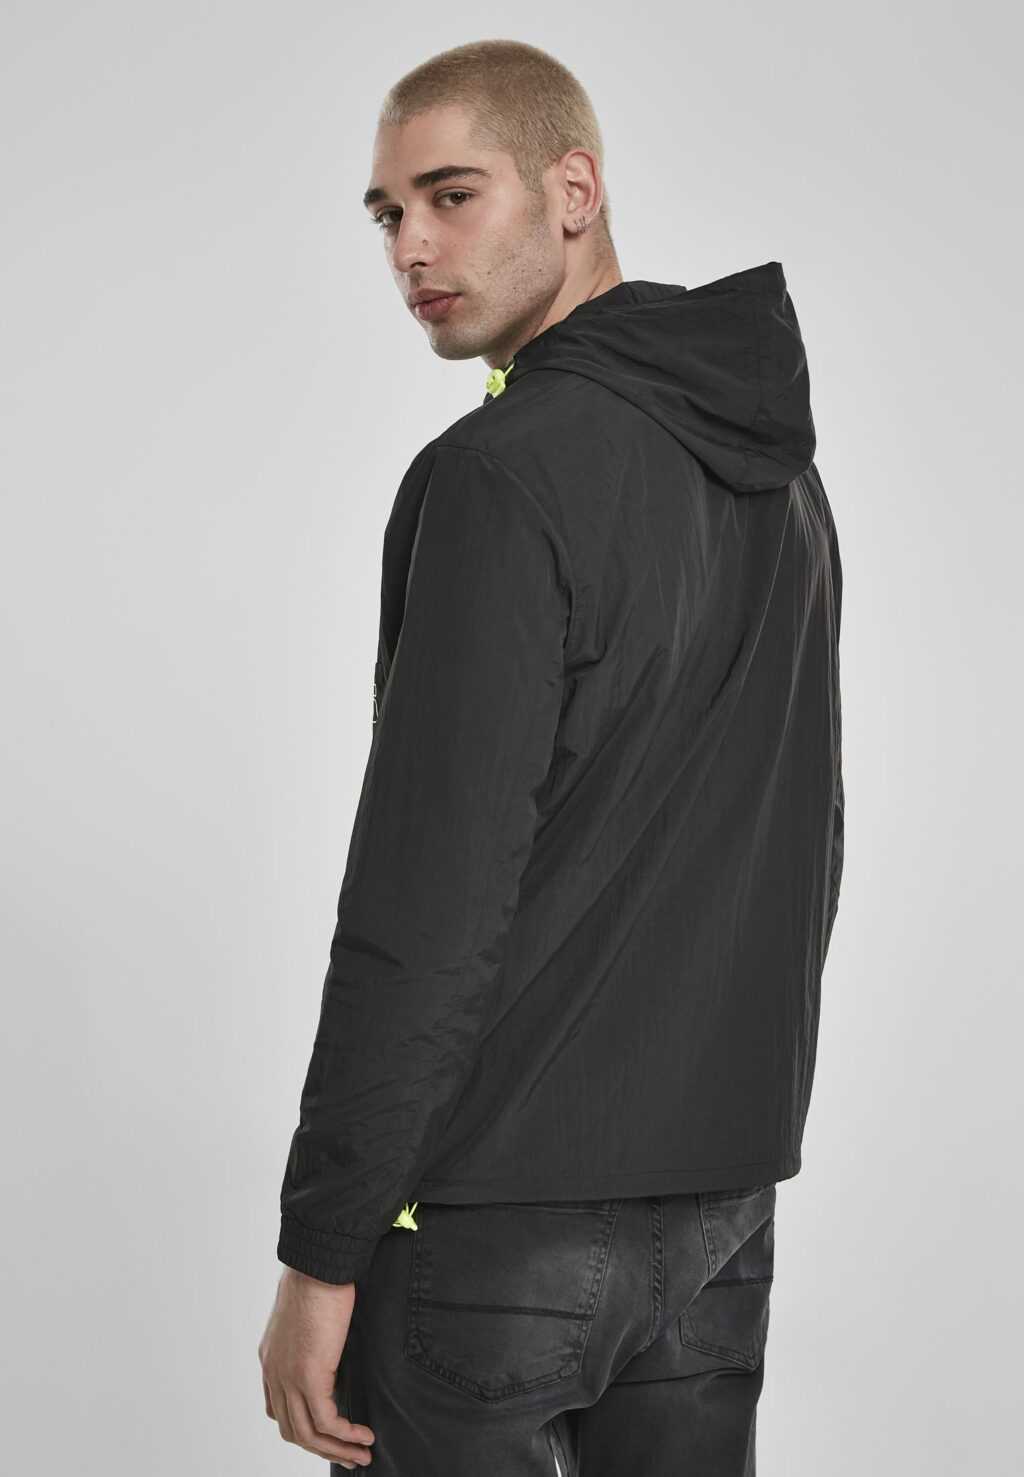 Urban Classics Contrast Pull Over Jacket black/electriclime TB3676